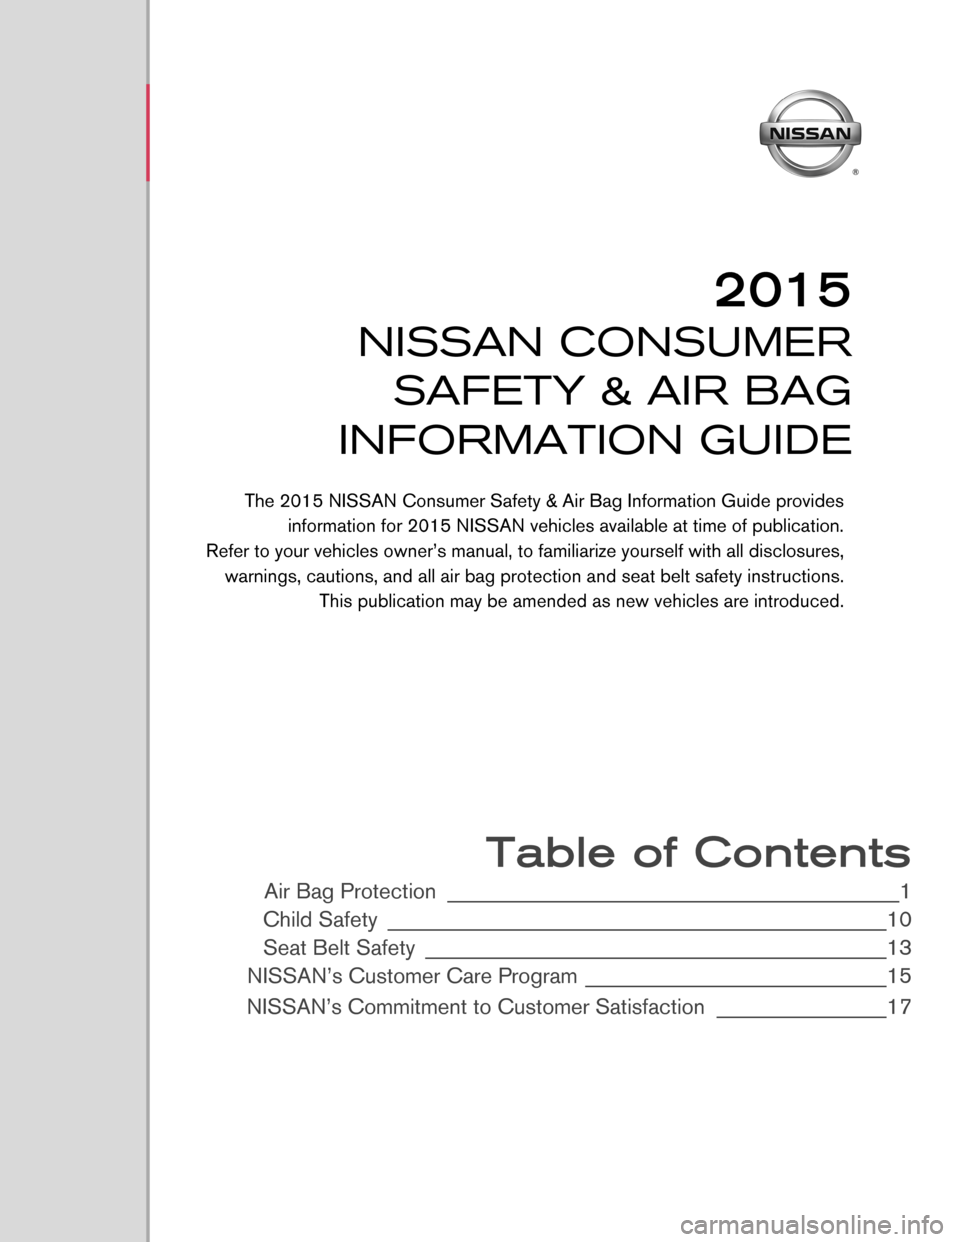 NISSAN QUEST 2015 RE52 / 4.G Consumer Safety Air Bag Information Guide 